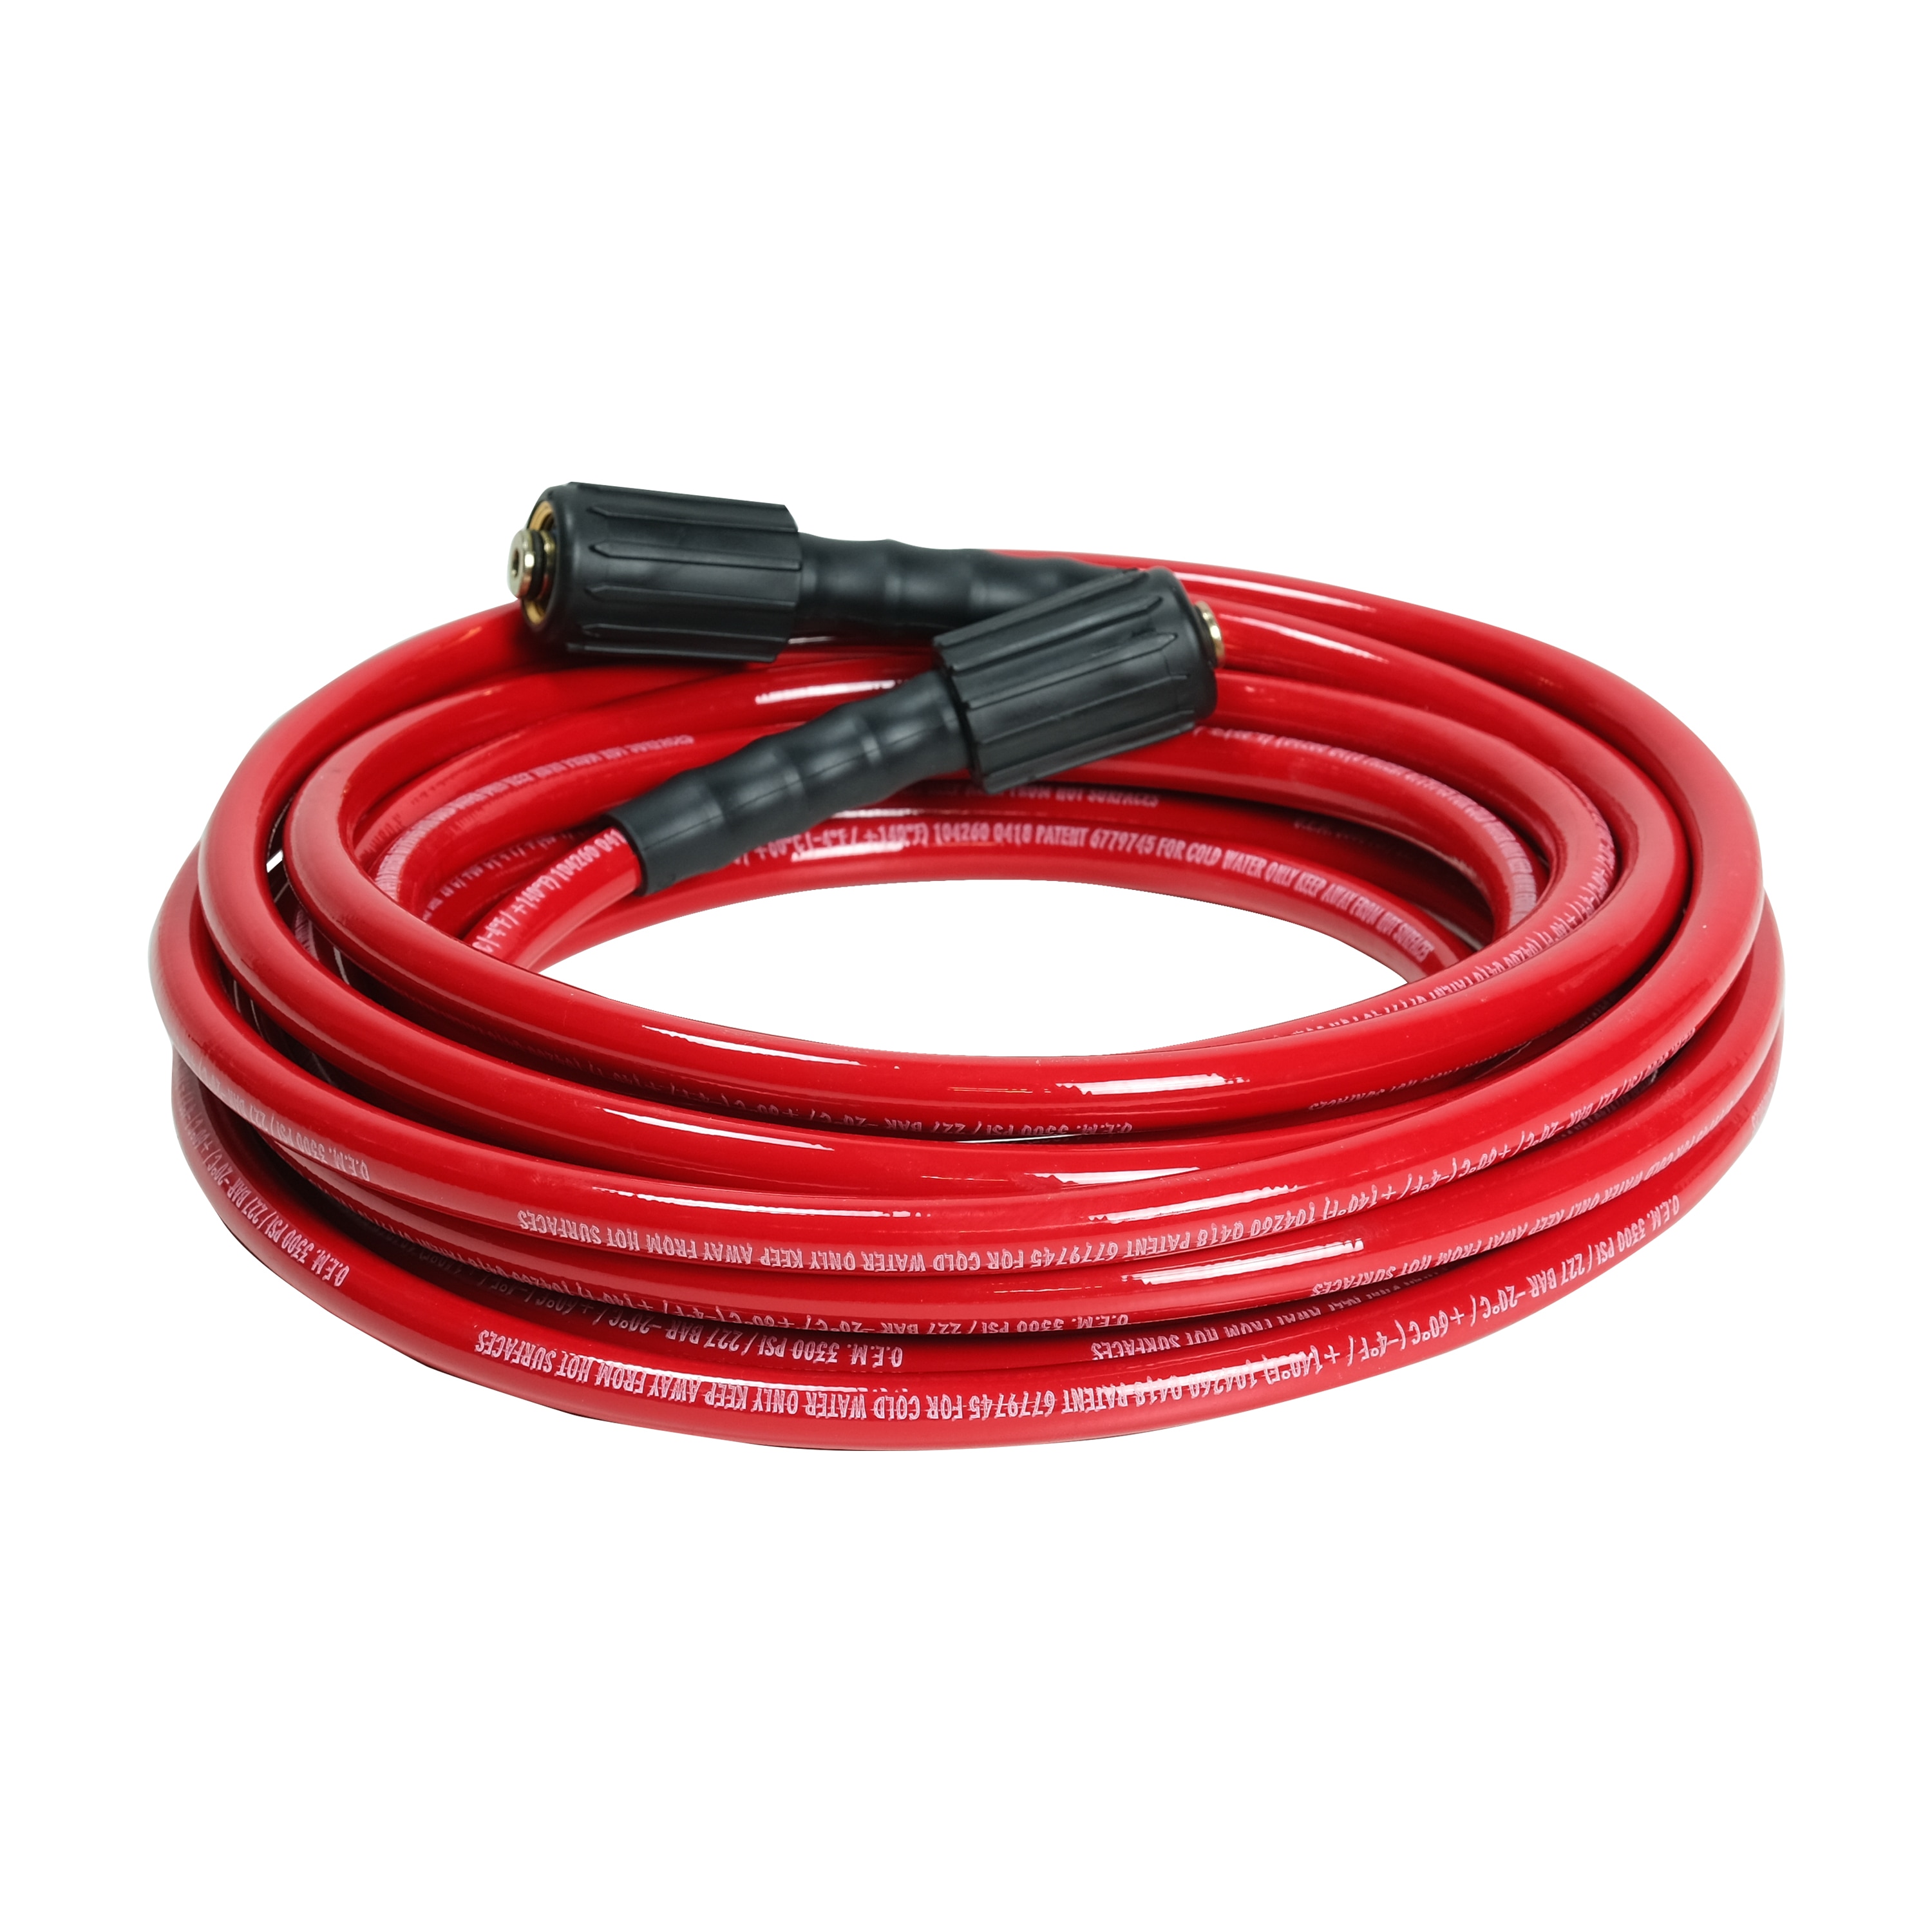 Challenge Xtreme 4 Metre Challenge Xtreme DW2200IV Pressure Washer Replacement Hose Four 4M M 